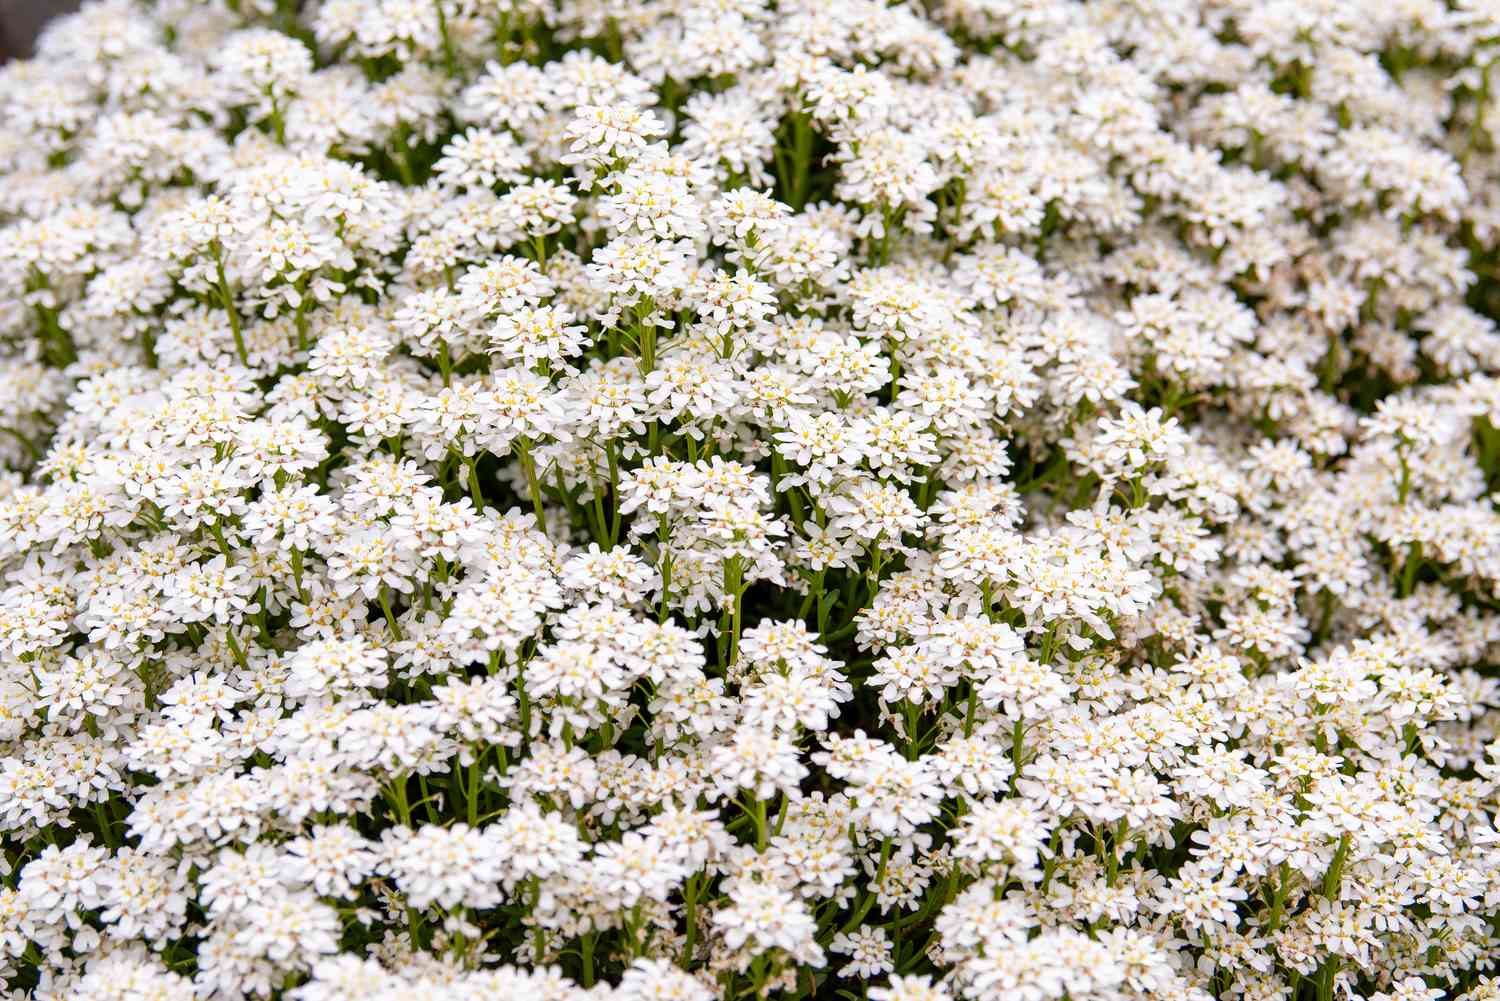 Candytuft plant with tiny white flowers clustered densely